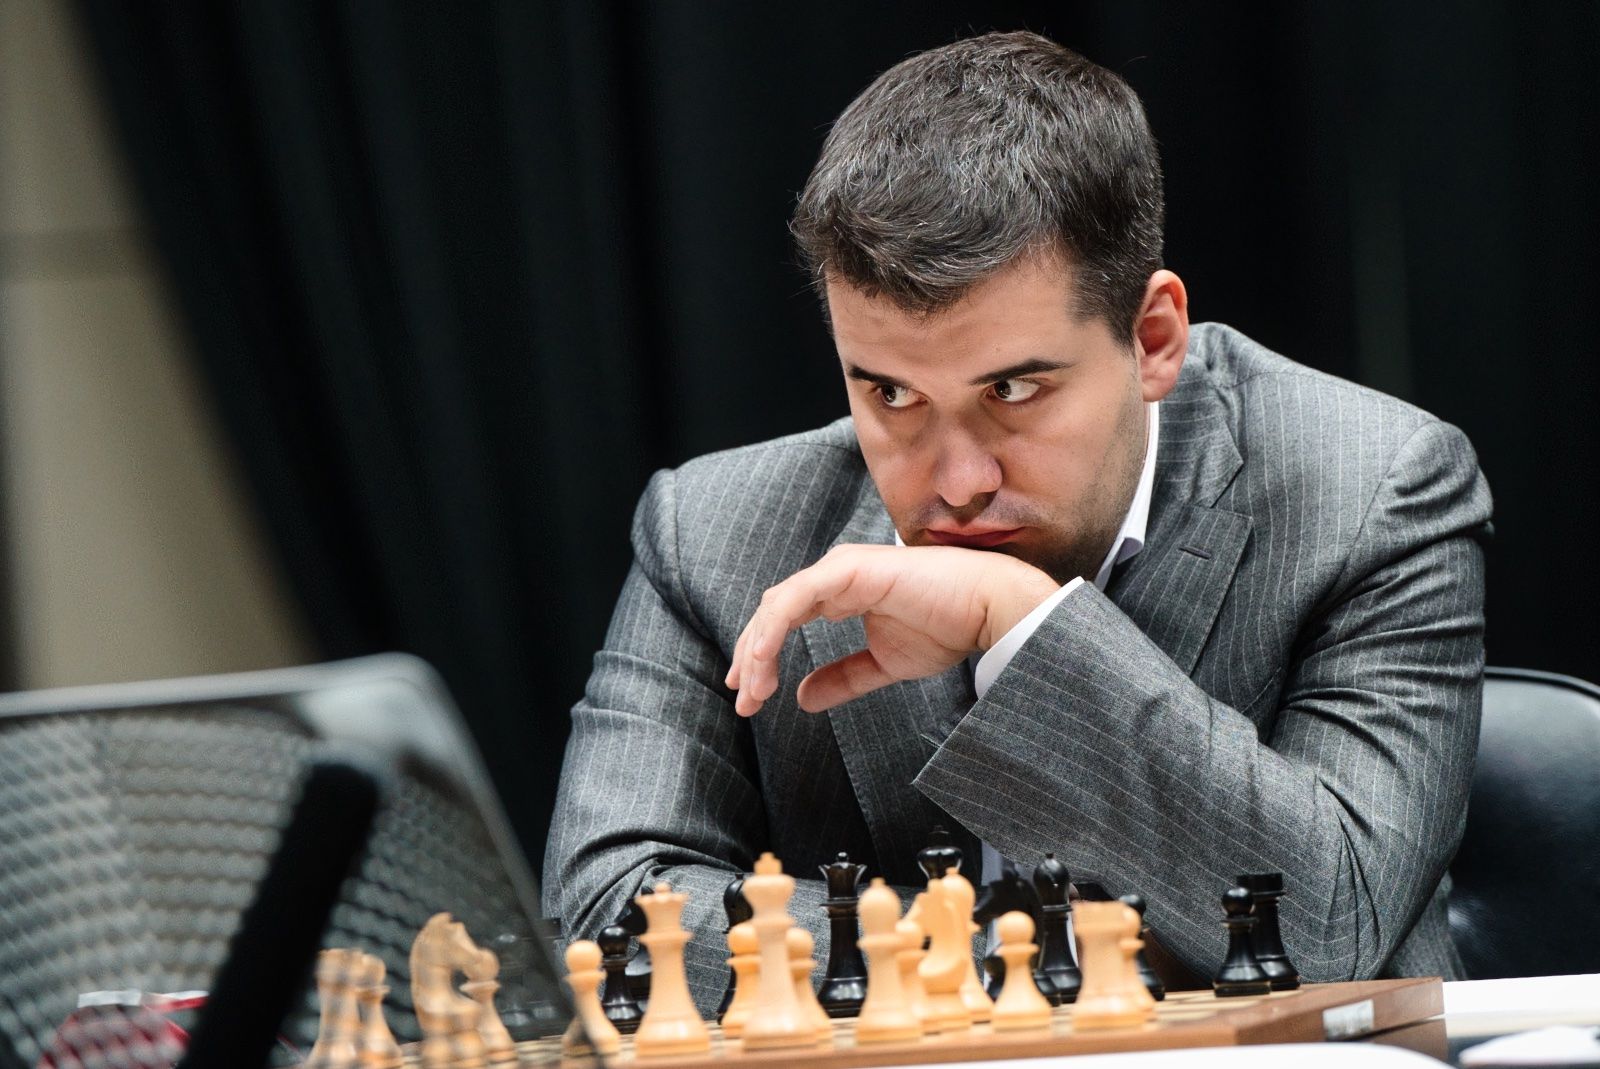 Chess: Ding misses wins and his prep leaks as Nepomniachtchi keeps the lead, World Chess Championship 2023